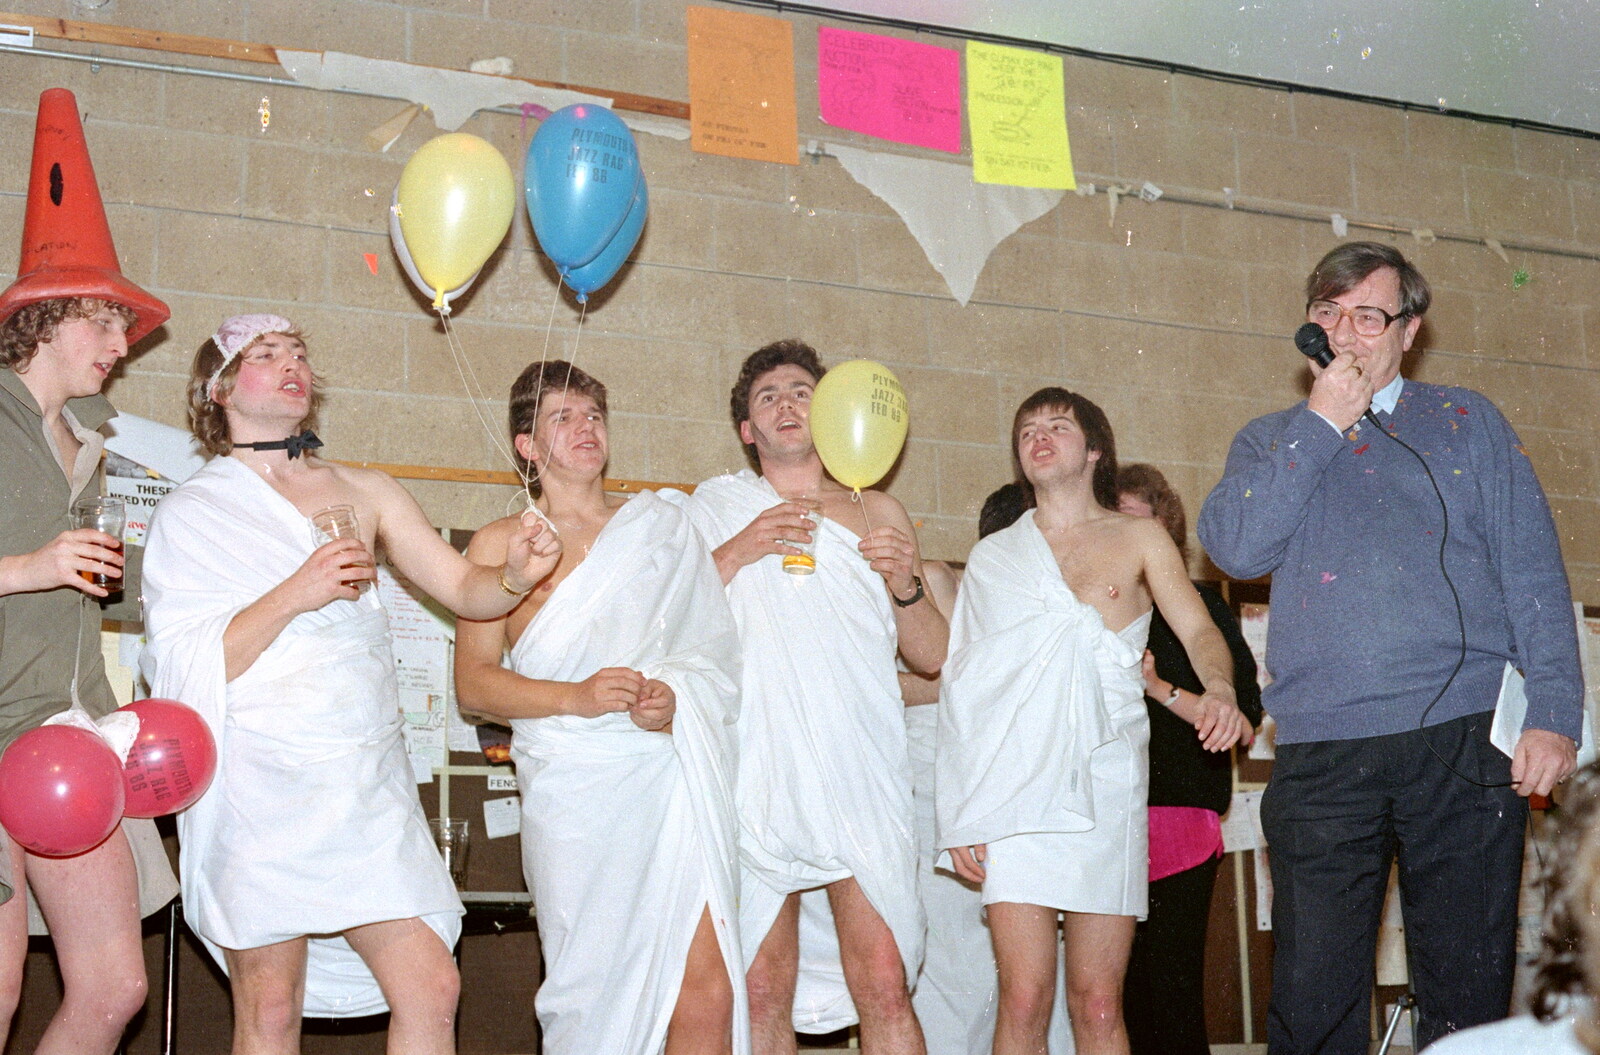 SU execs in togas from Uni: The PPSU "Jazz" RAG Review and Charity Auction, Plymouth, Devon - 19th February 1986